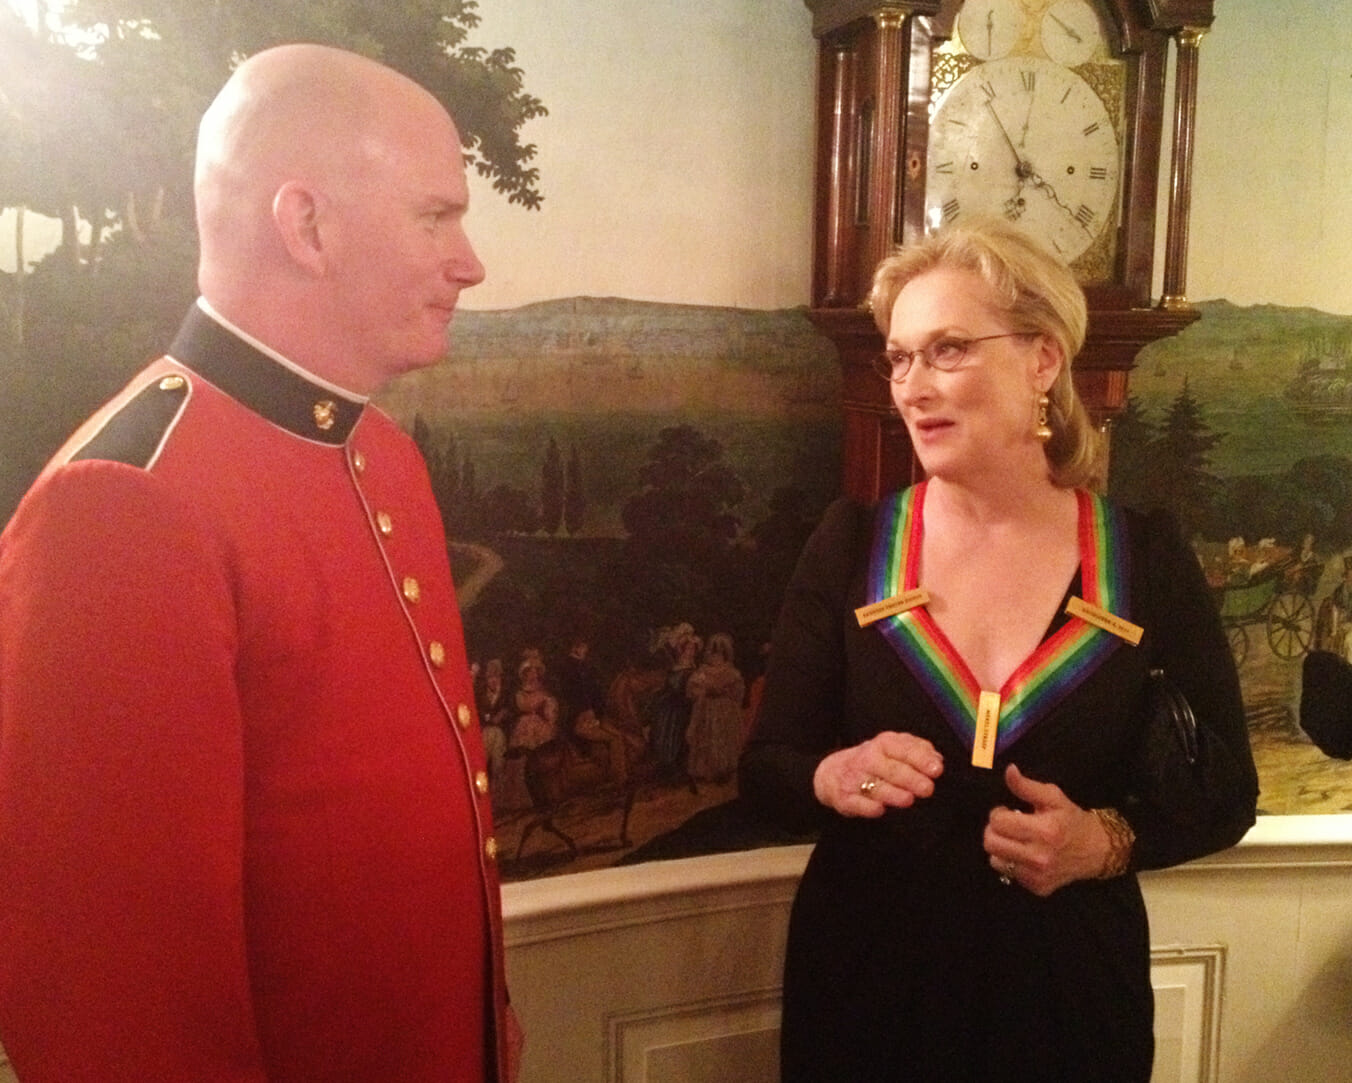 Peter Wilson talks with actress Meryl Streep at the Kennedy Center Honors reception at the White House